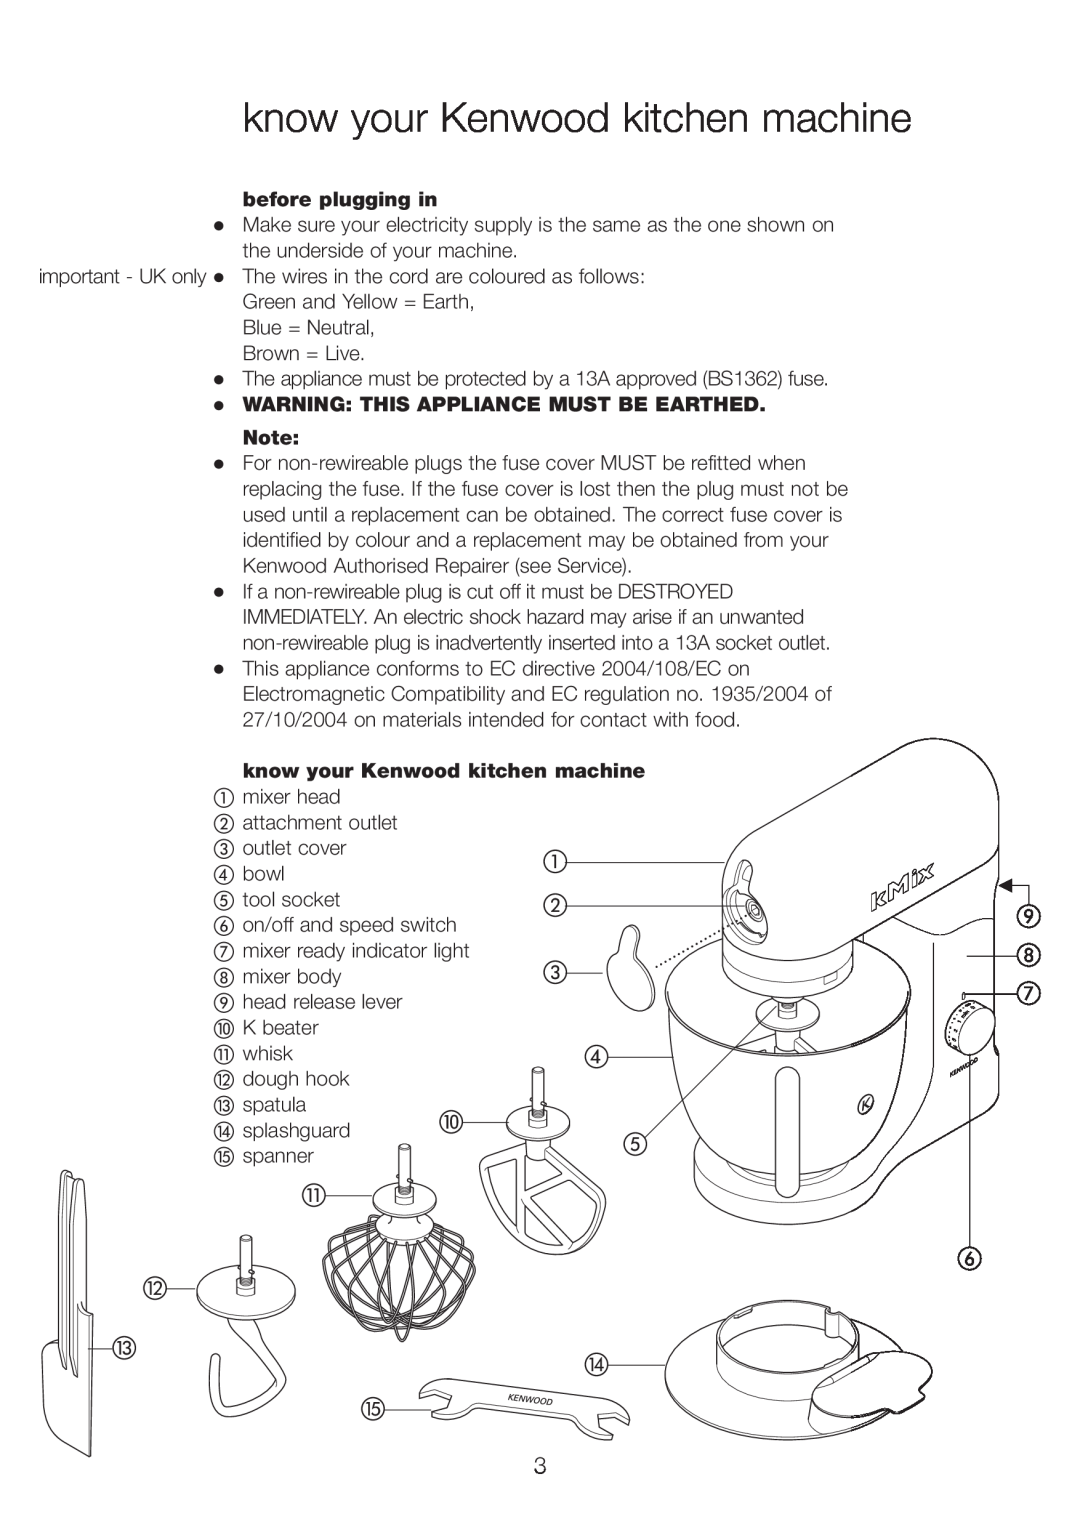 Kenwood KMX manual know your Kenwood kitchen machine, before plugging in, WARNING THIS APPLIANCE MUST BE EARTHED. Note 